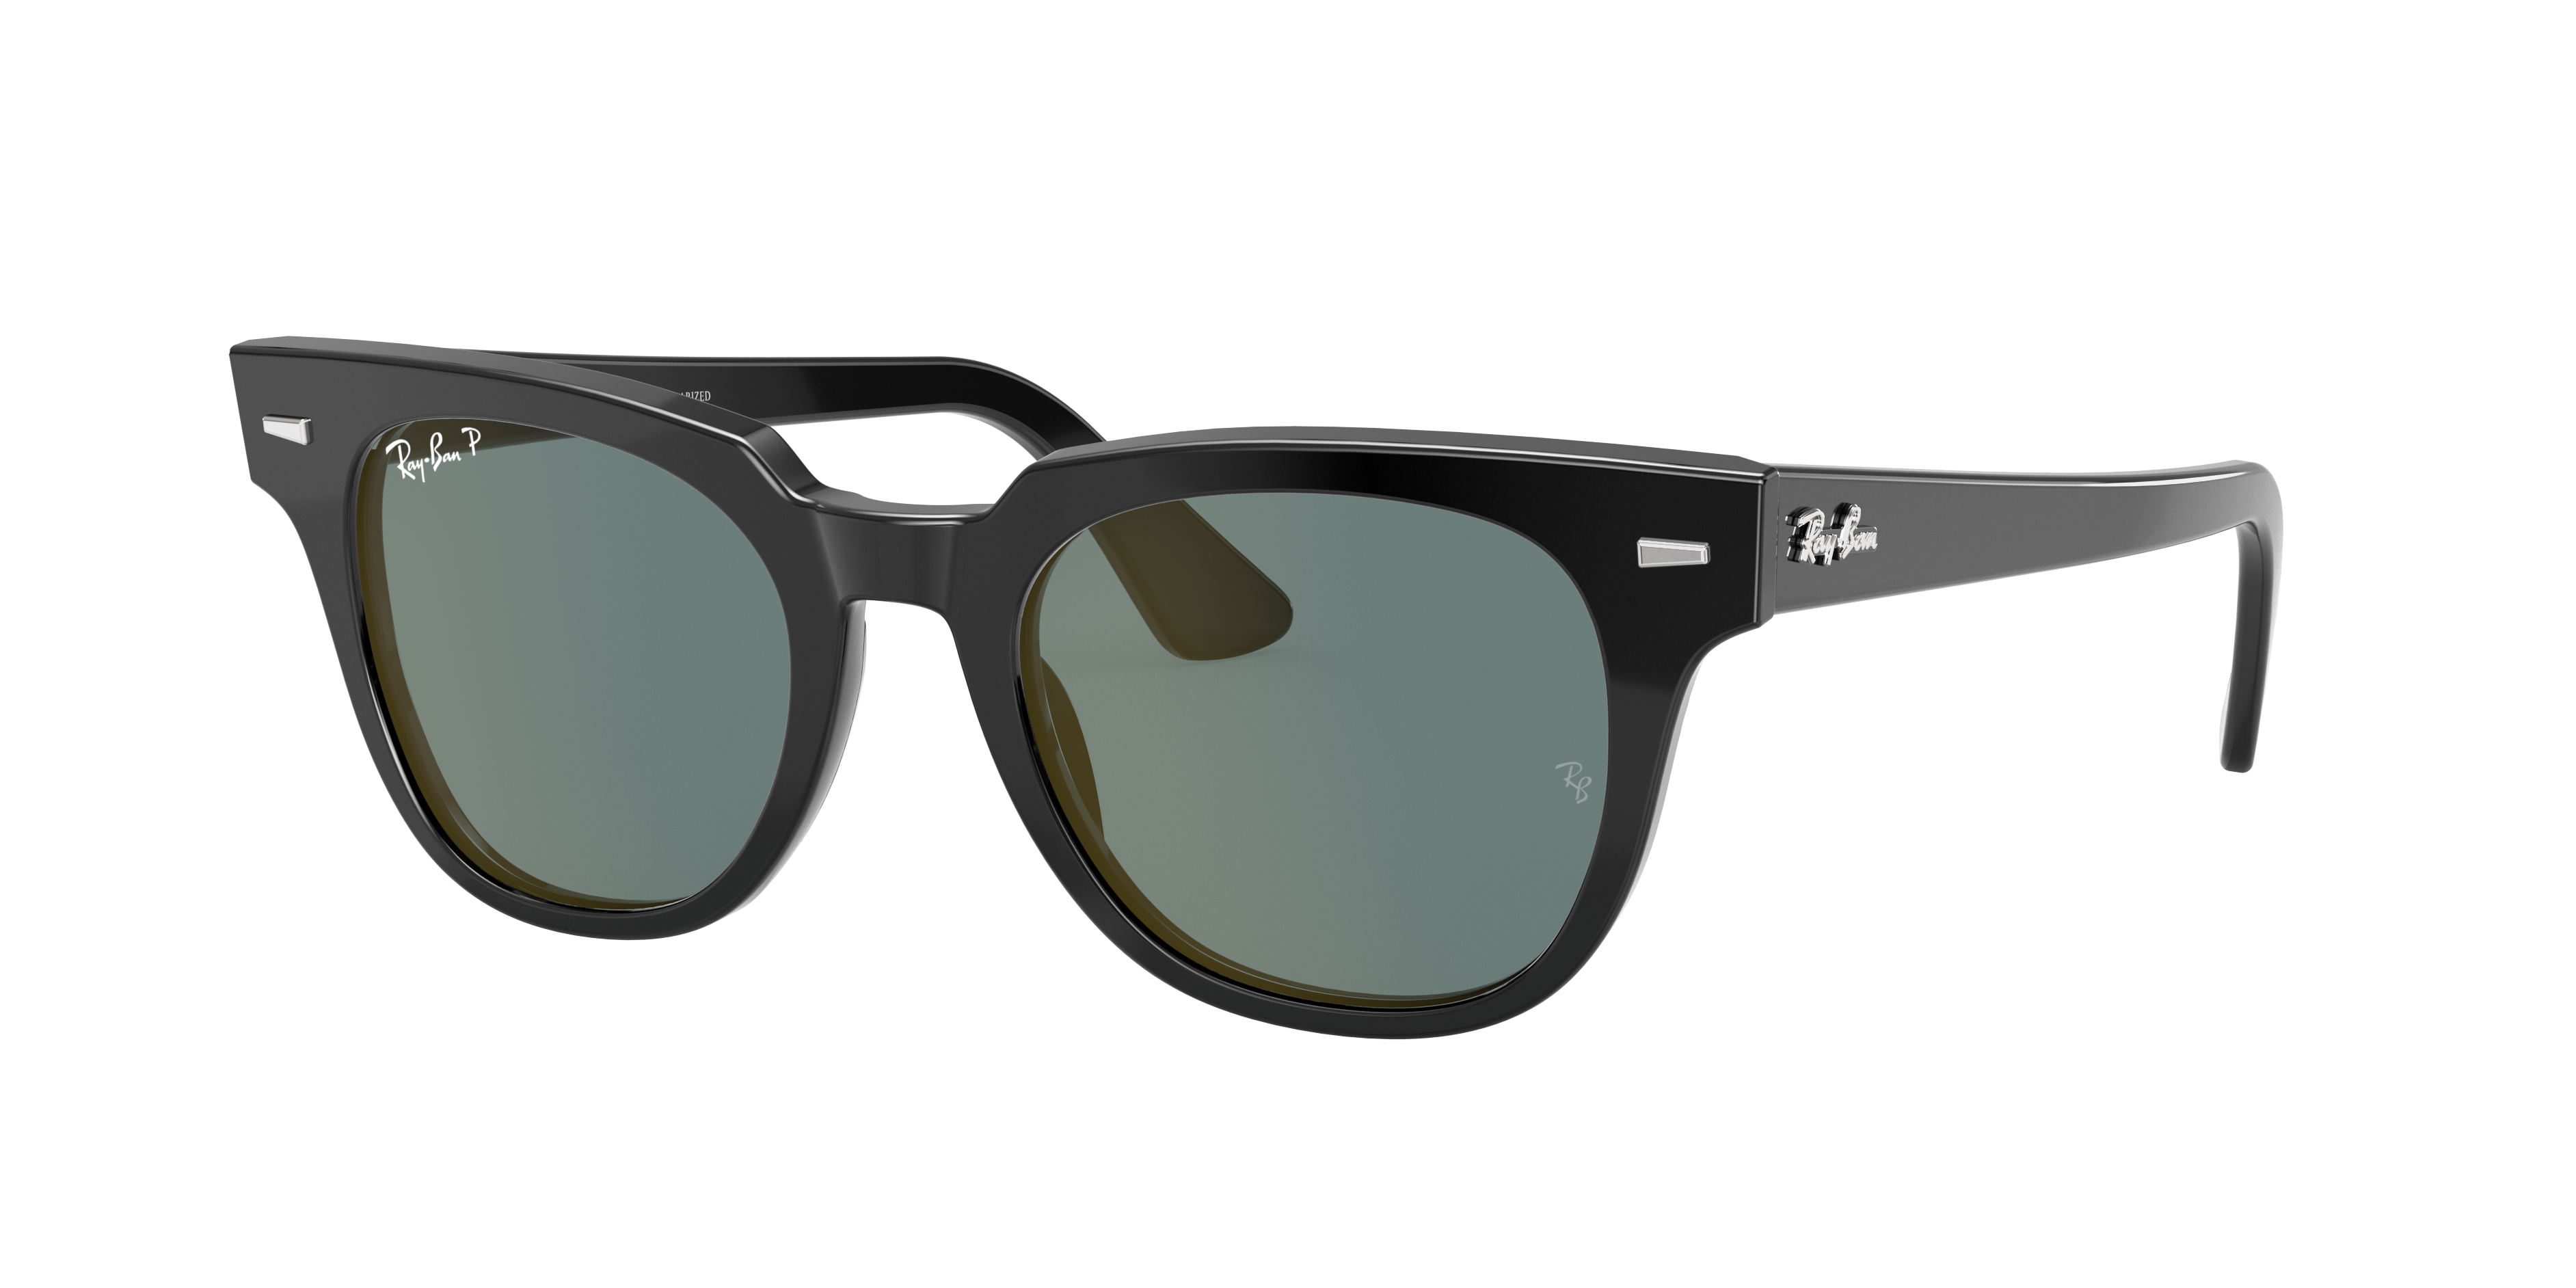 Check out the Meteor Classic at ray-ban.com